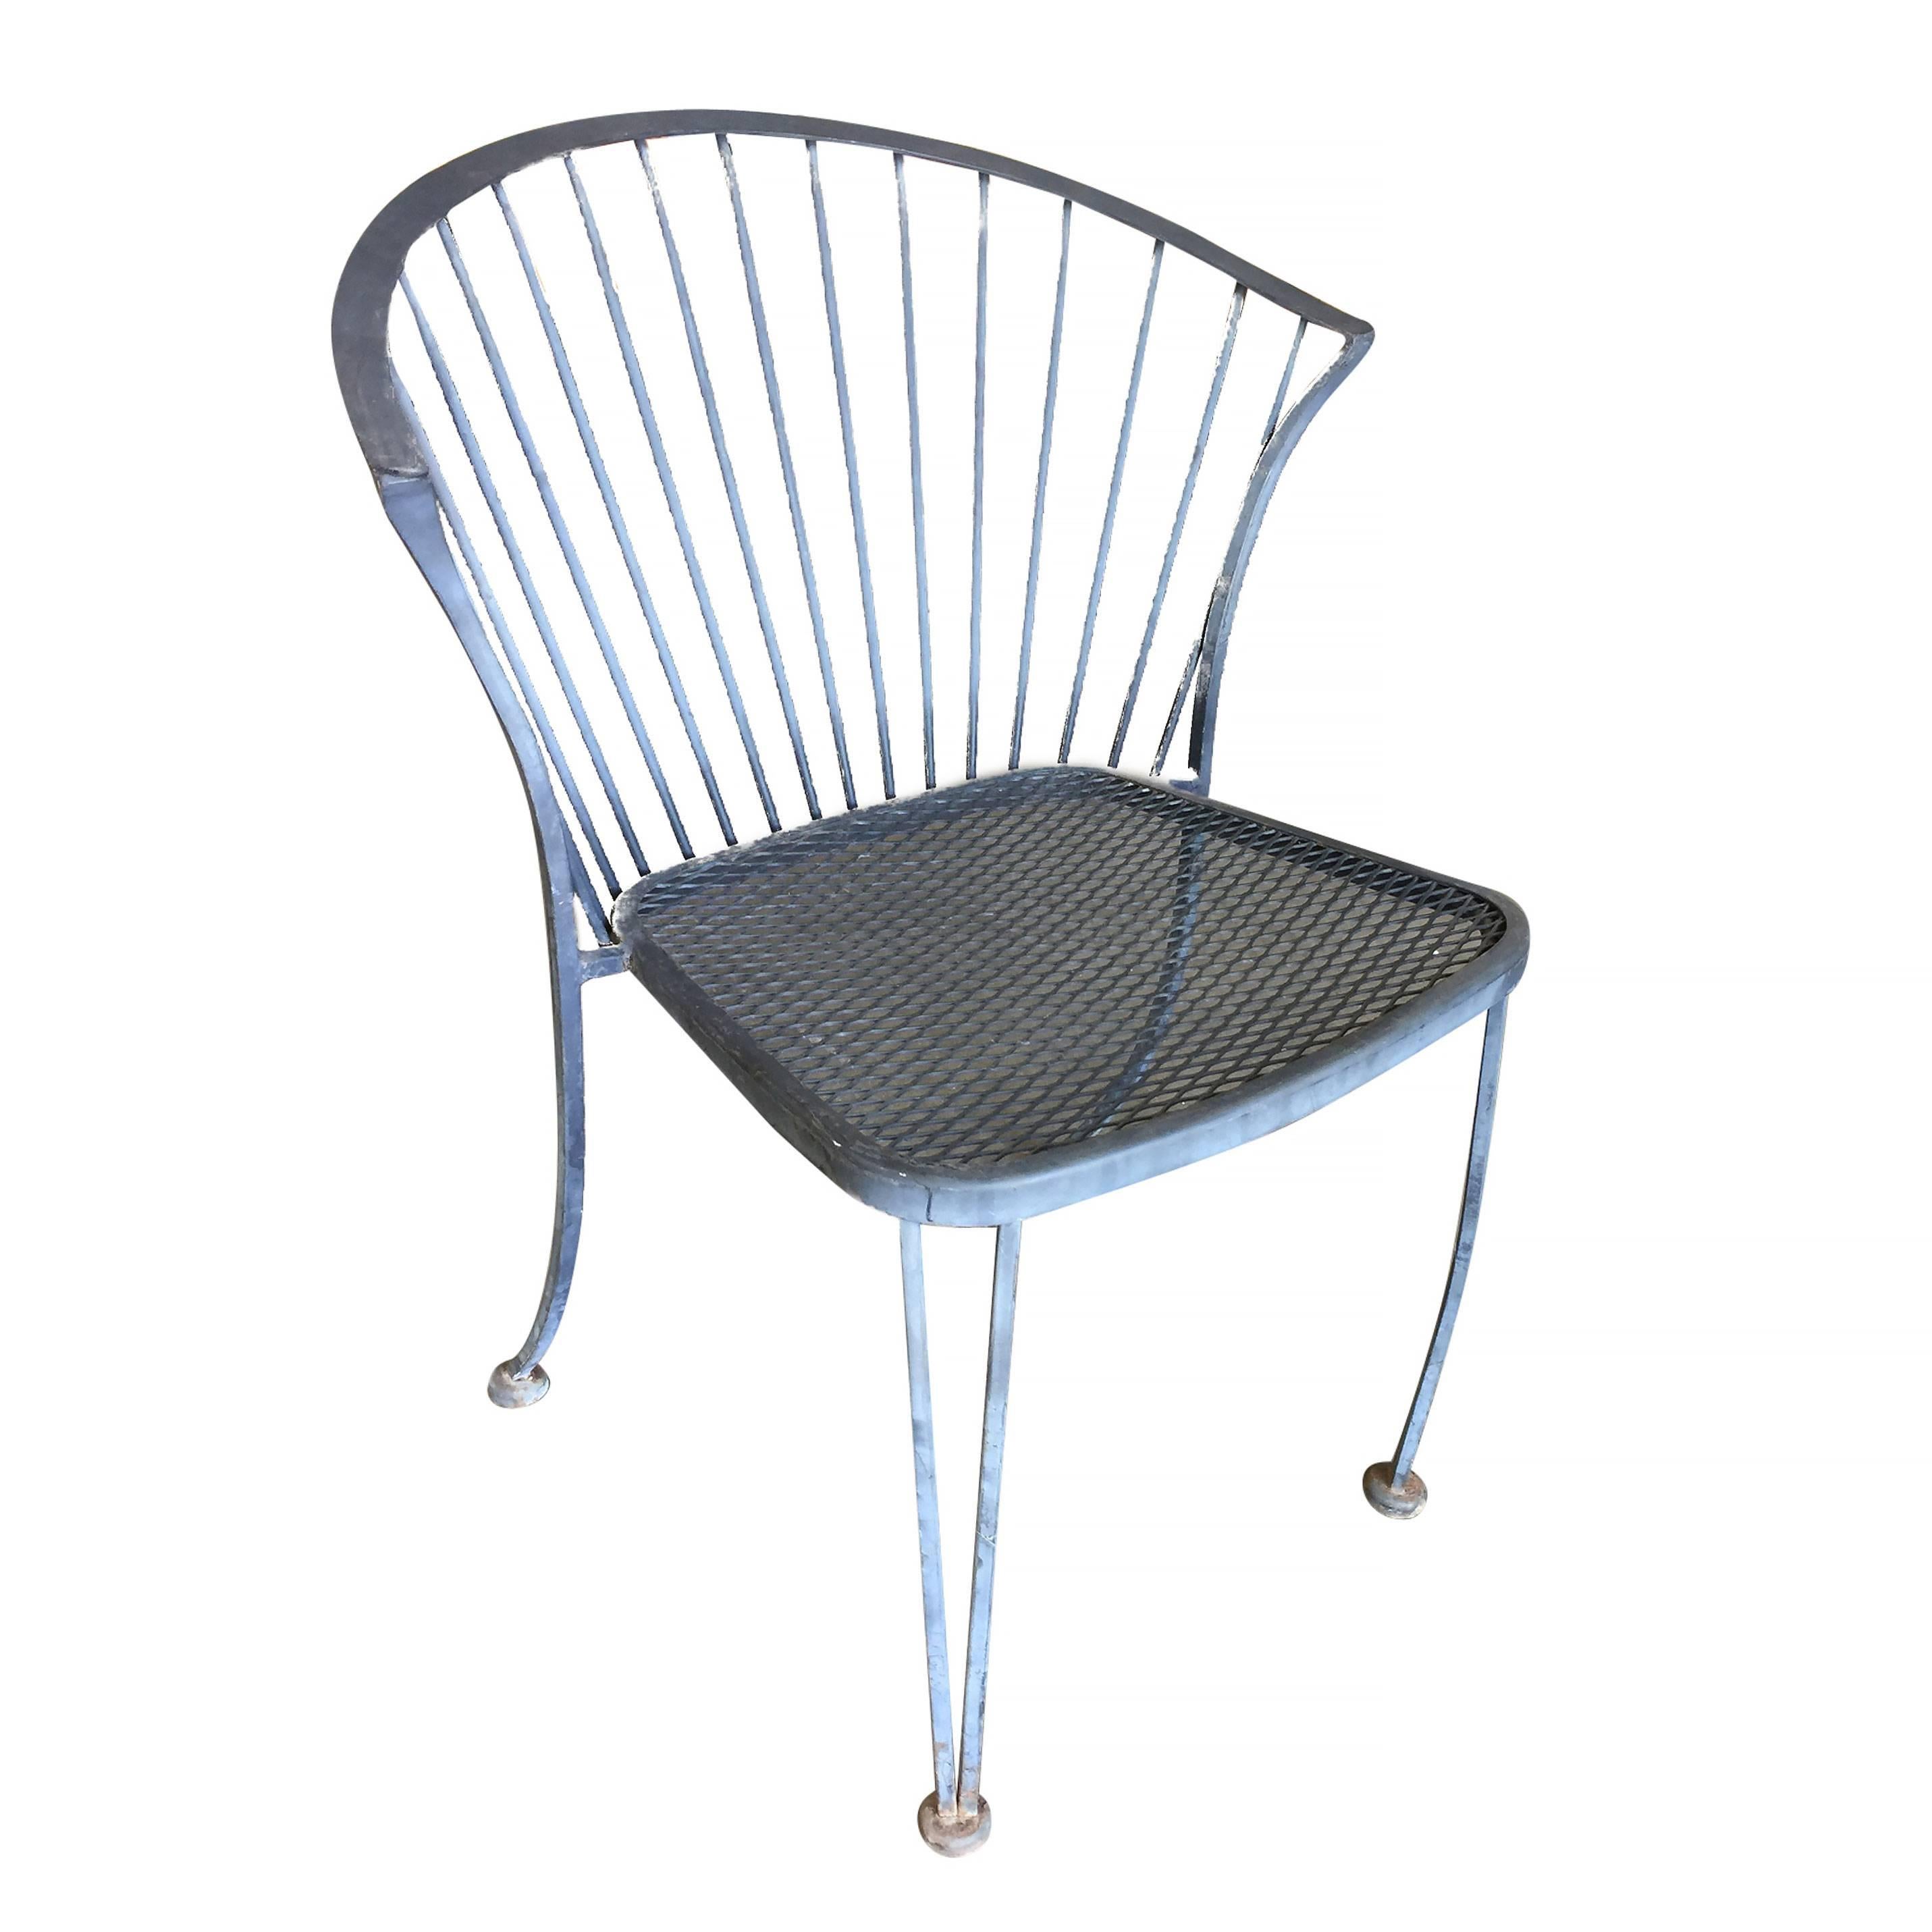 Set of four Woodard Pinecrest rod iron outdoor/patio chair with distinct curved modernist backrest. This chair is constructed with solid core iron rods finished in a pure white finish and a padded seat.

Available.